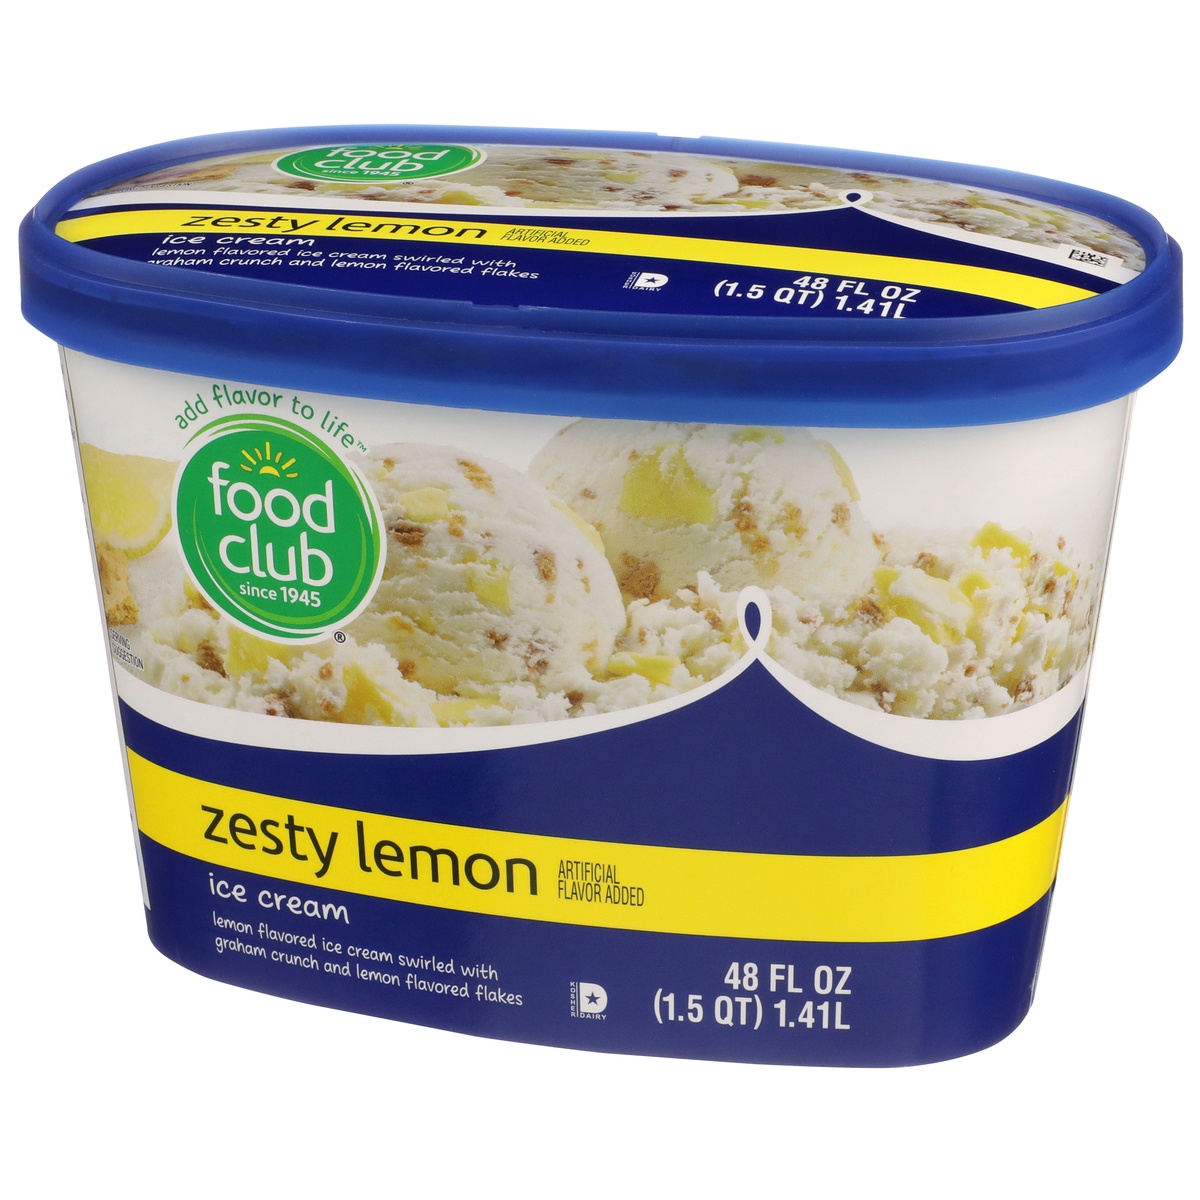 slide 3 of 10, Food Club Zesty Lemon Flavored Ice Cream Swirled With Graham Crunch And Lemon Flavored Flakes, 48 fl oz